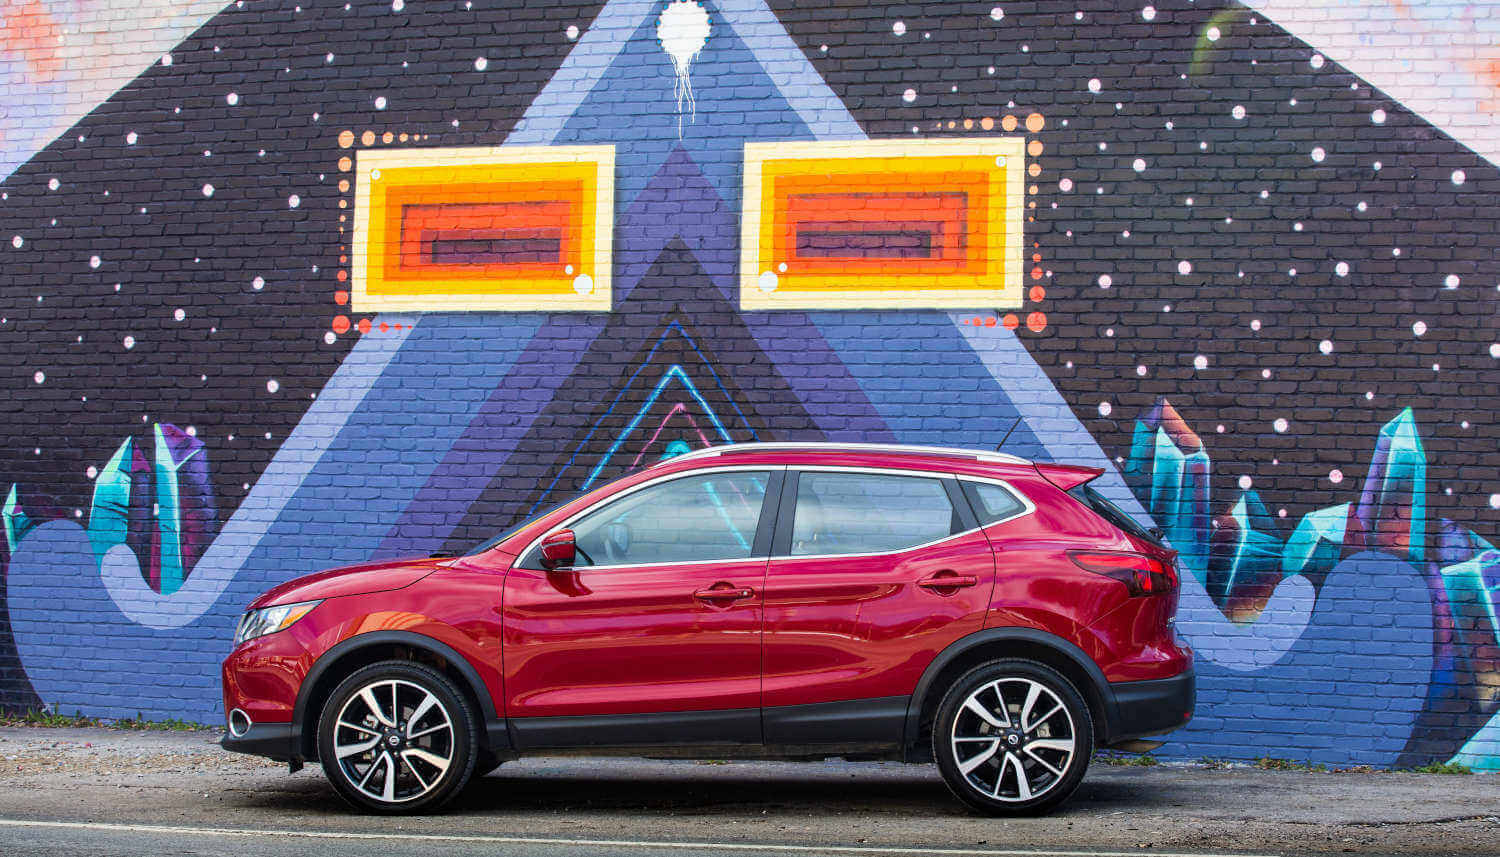 This Nissan Rogue Sport landed on the list of subcompact SUVs under $20,000